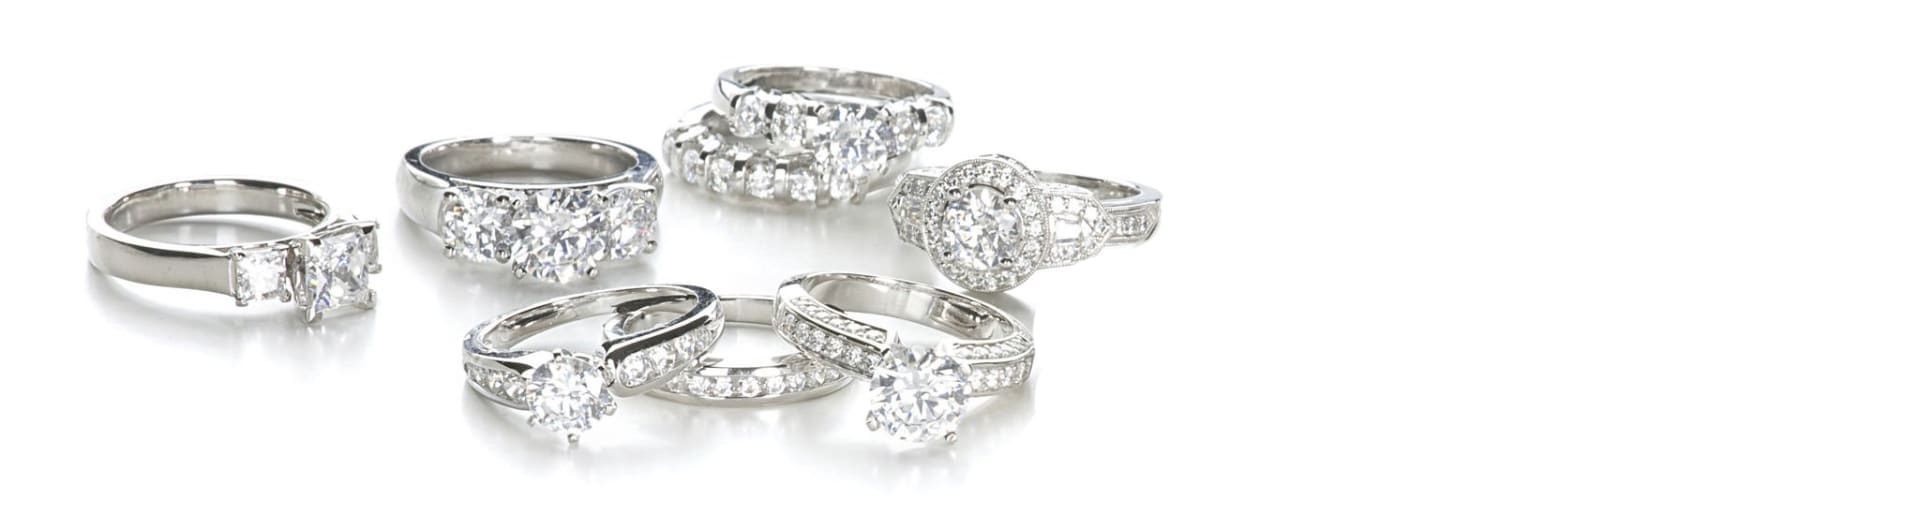 How Can I Afford an Engagement Ring?